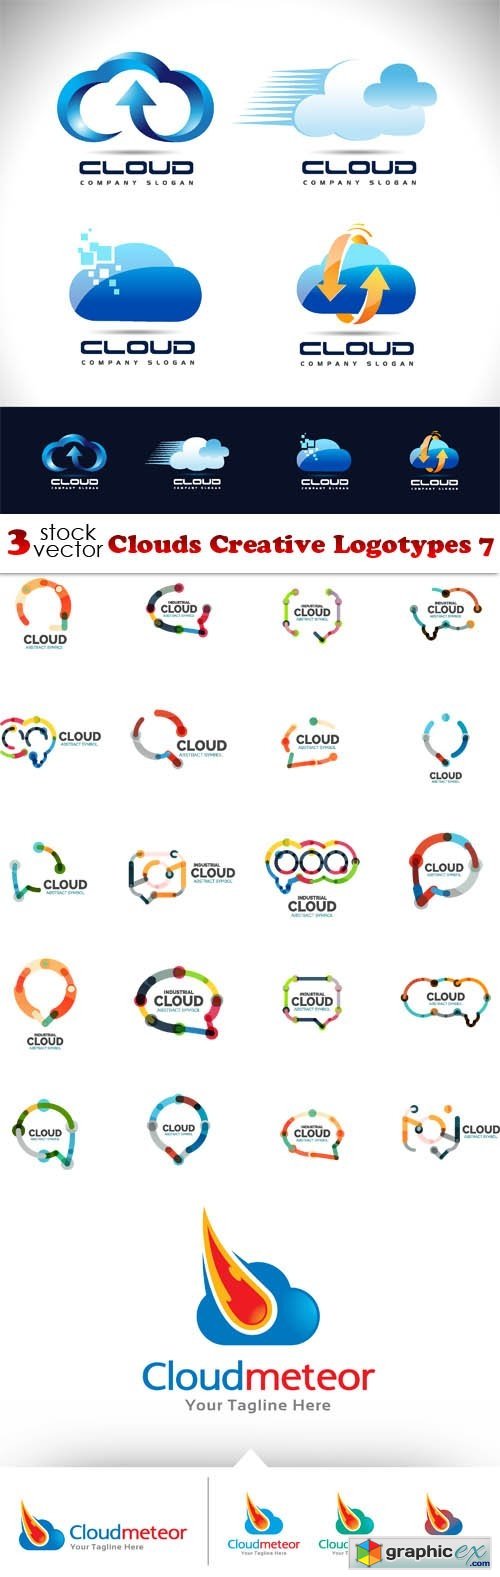 Clouds Creative Logotypes 7